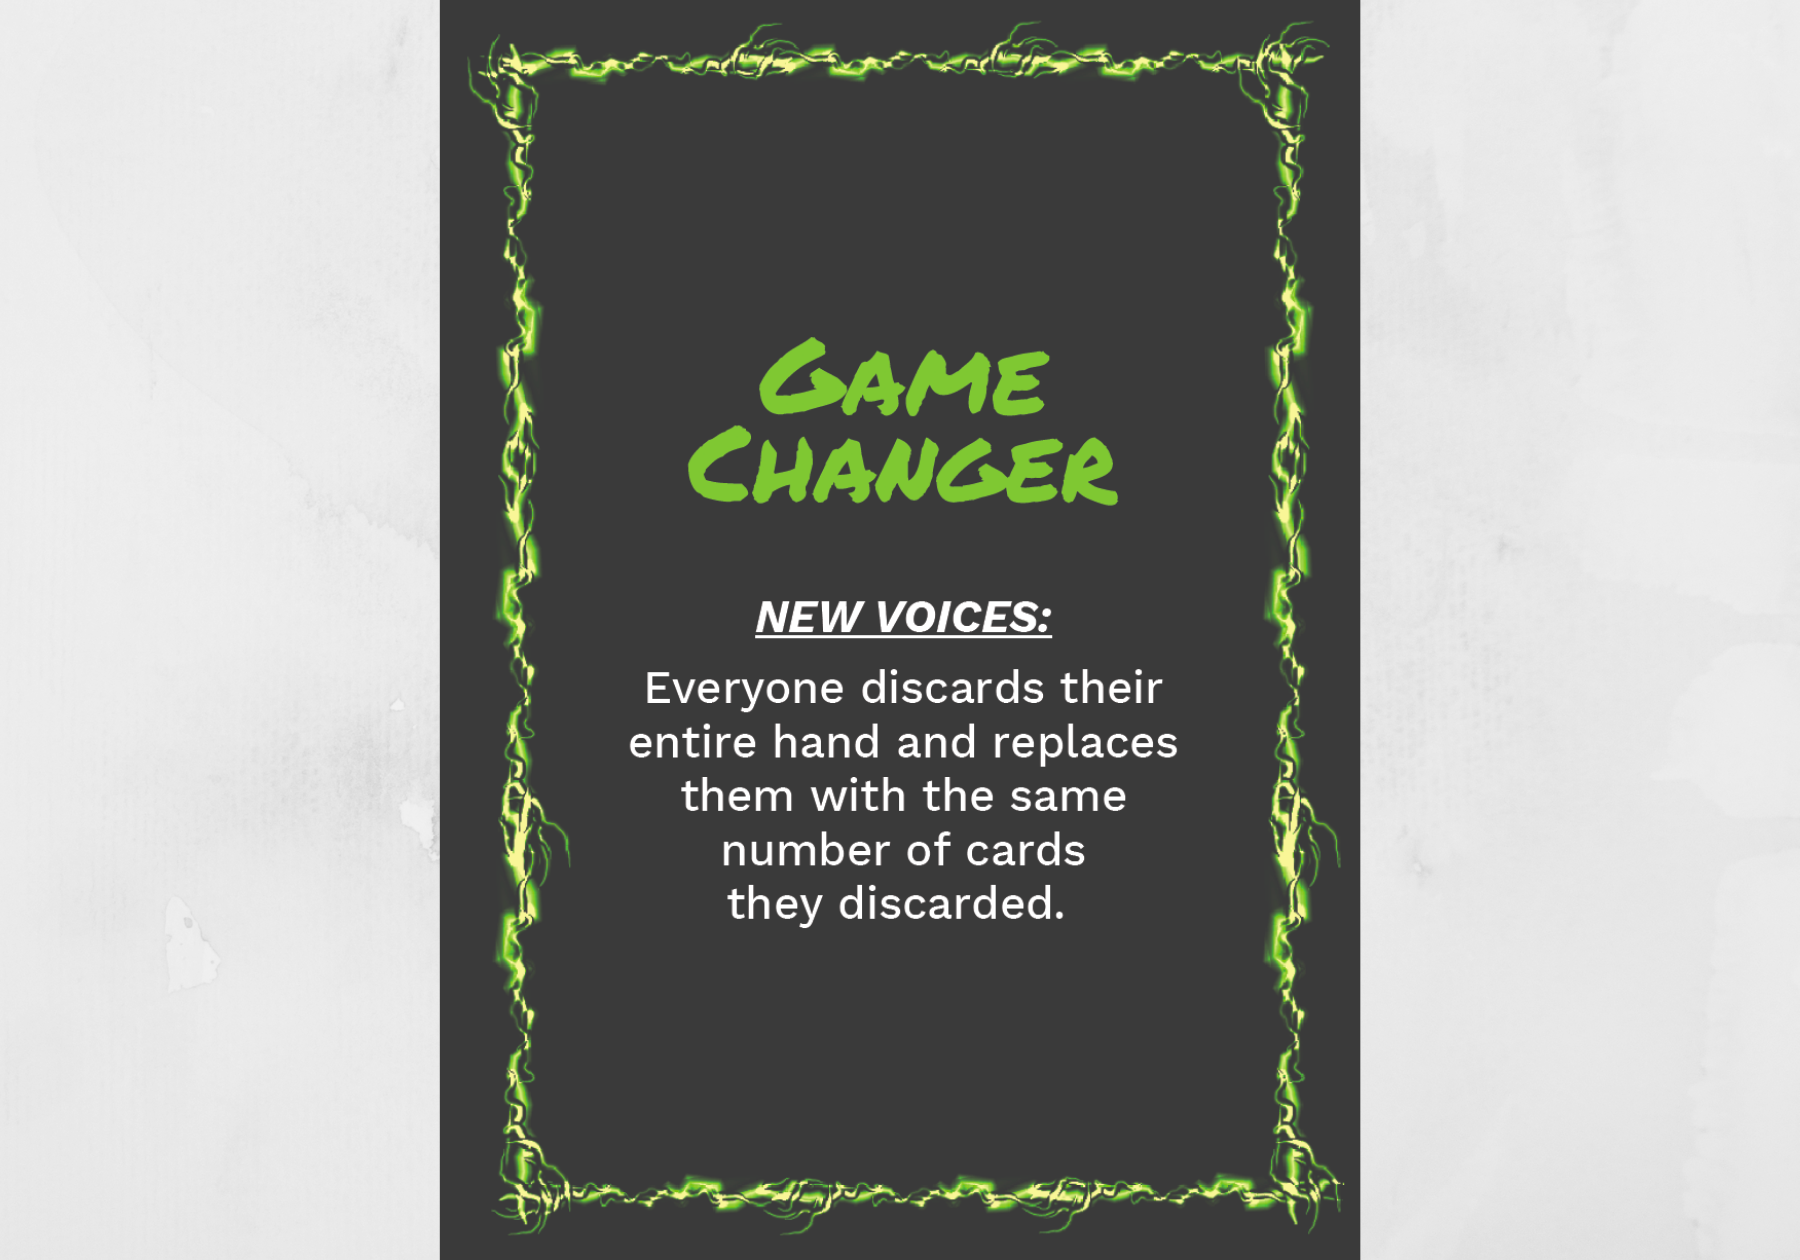 Game Changer: The Game of Activist Tactics